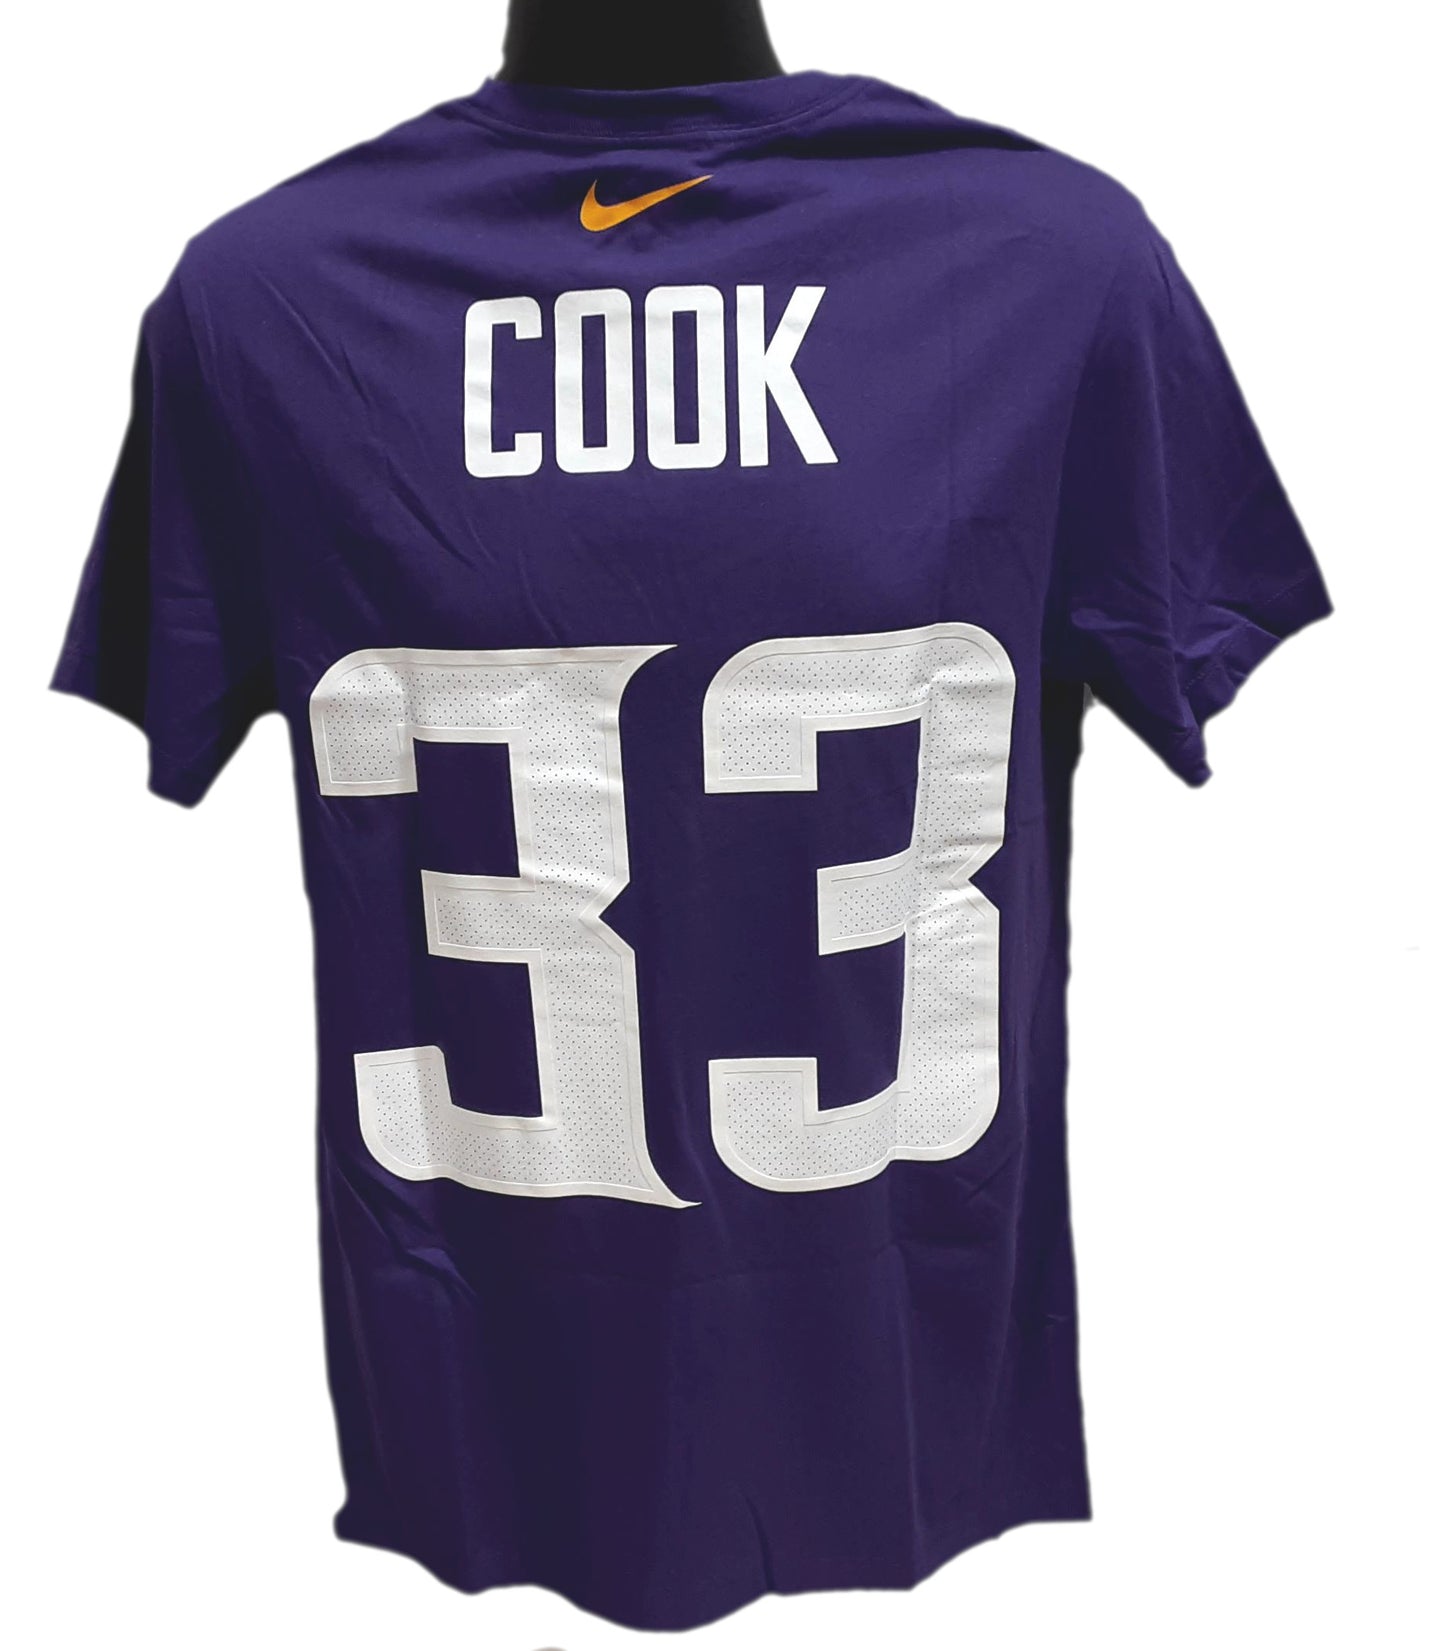 T-SHIRT NAME AND NUMBER                  D. COOK